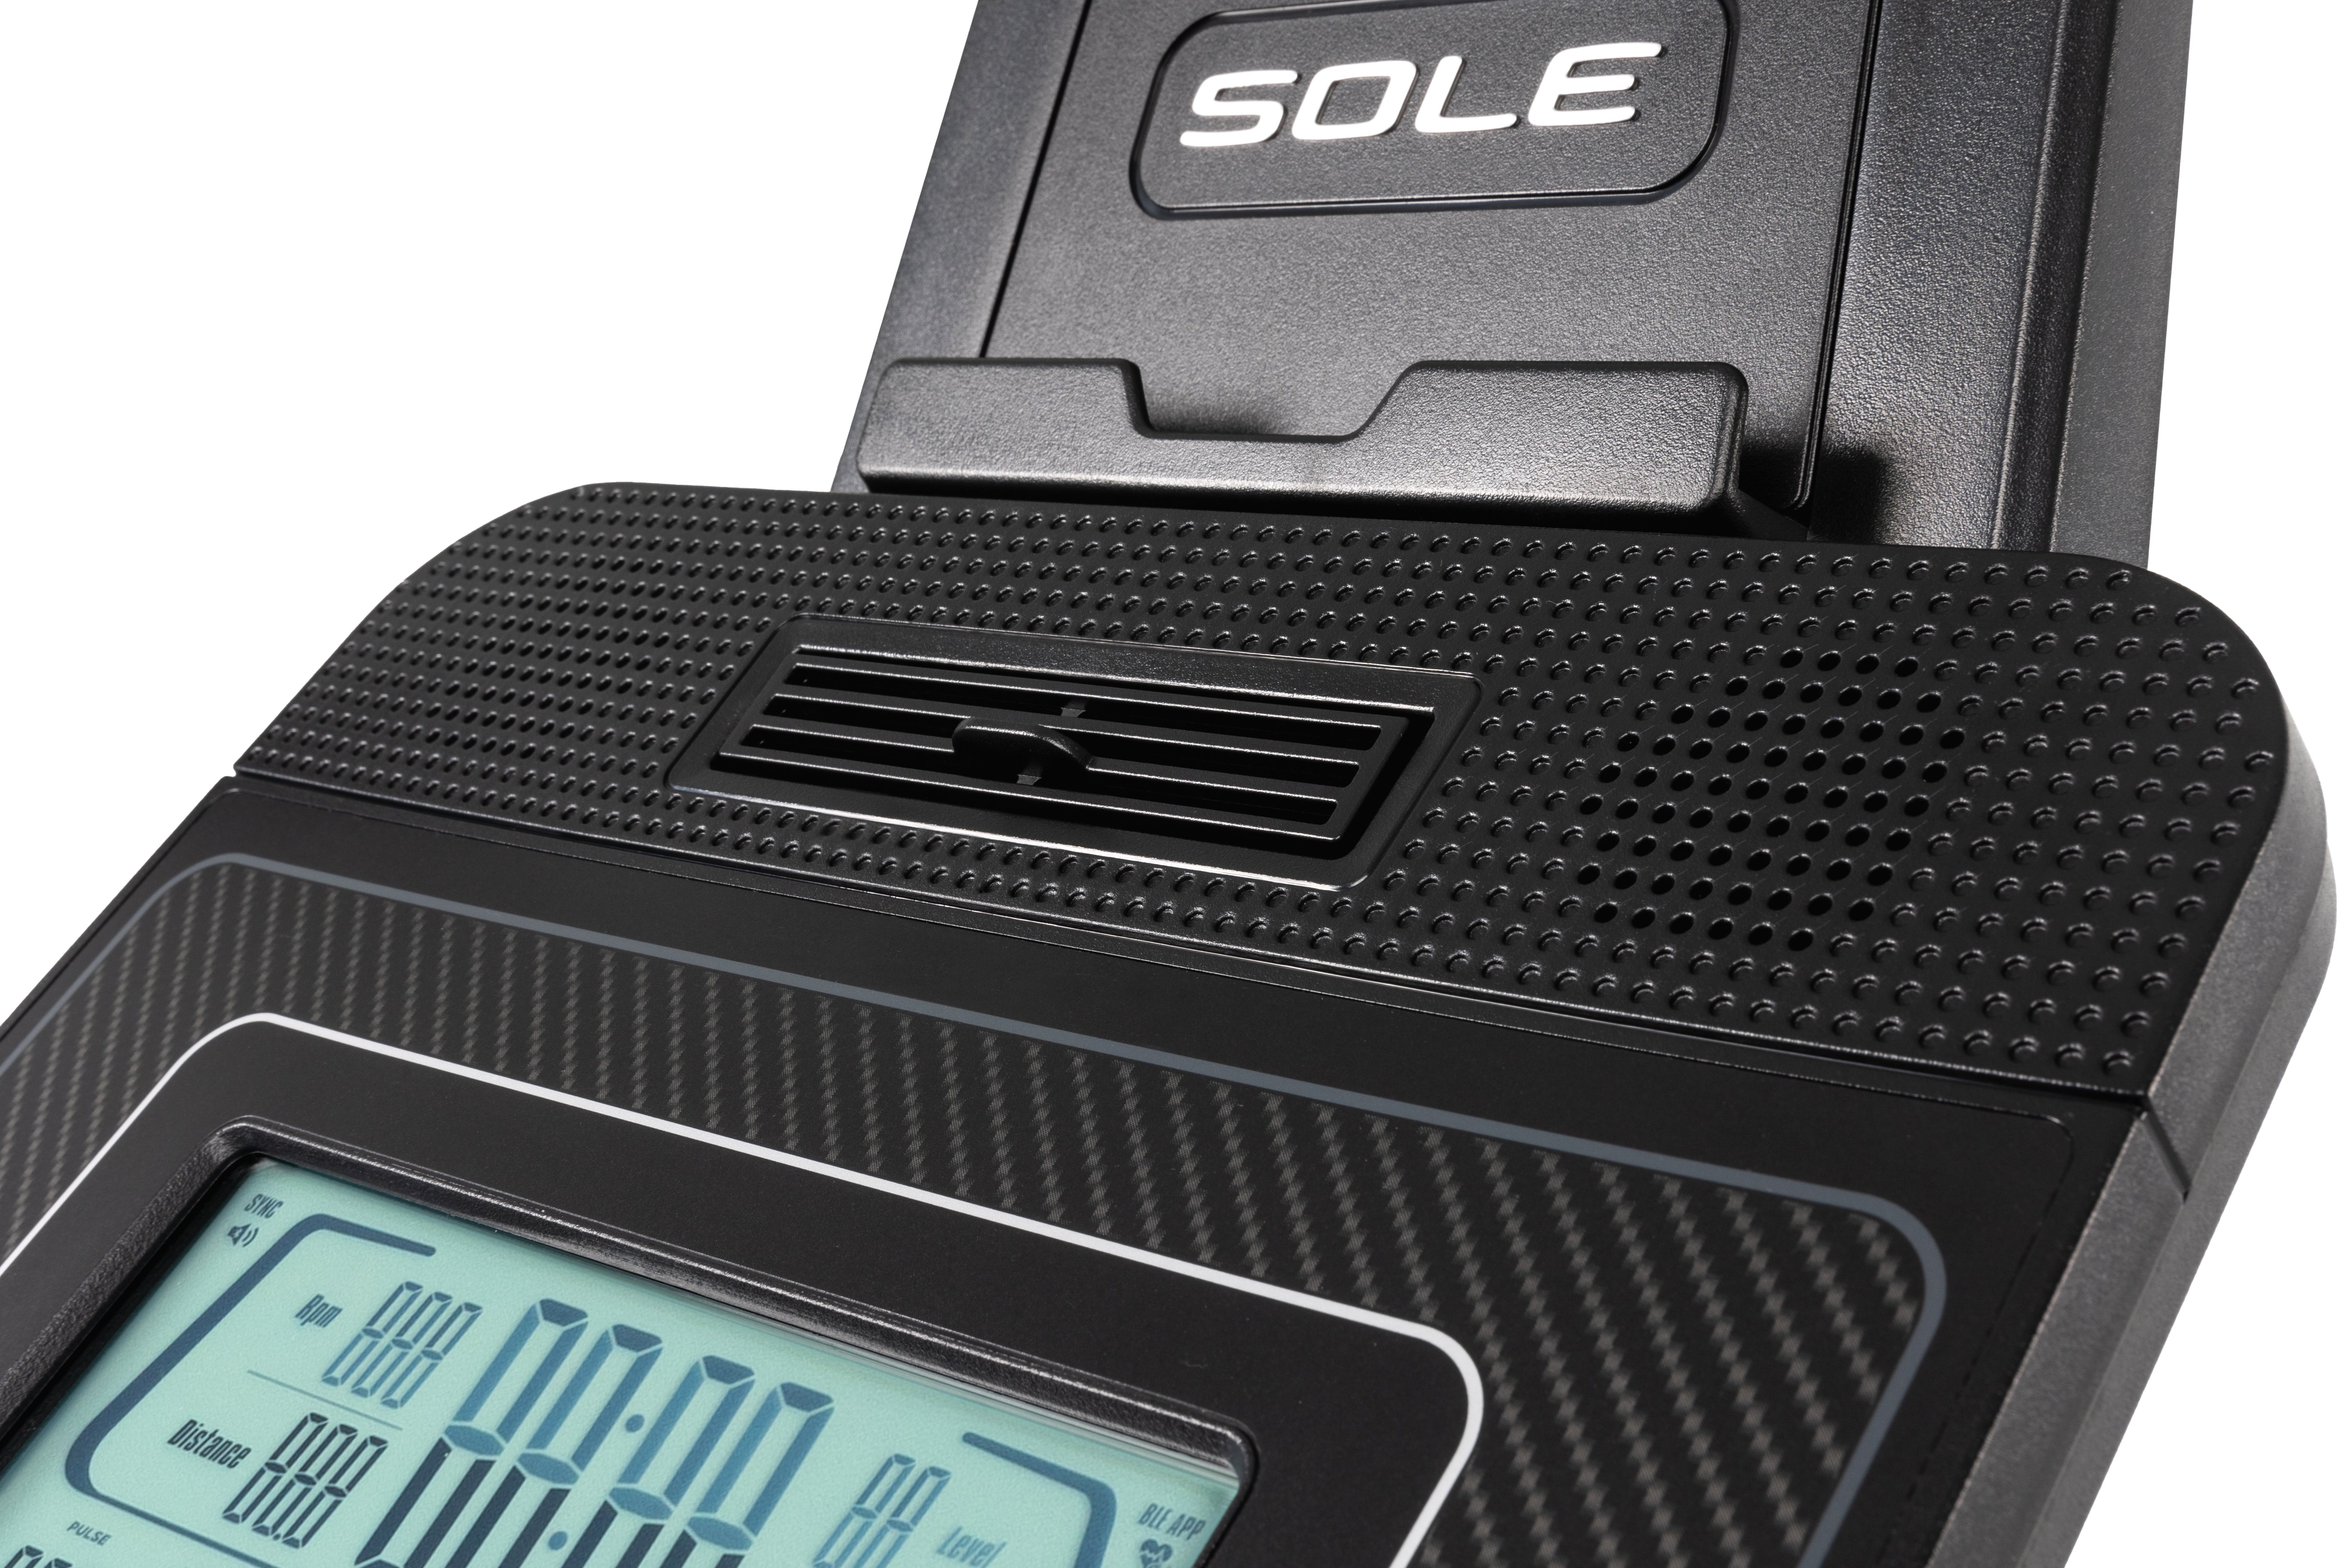 Close-up of the Sole B94 exercise bike's console, featuring the embossed 'SOLE' branding, a textured surface, a ventilation slot, and a digital display showing workout metrics.